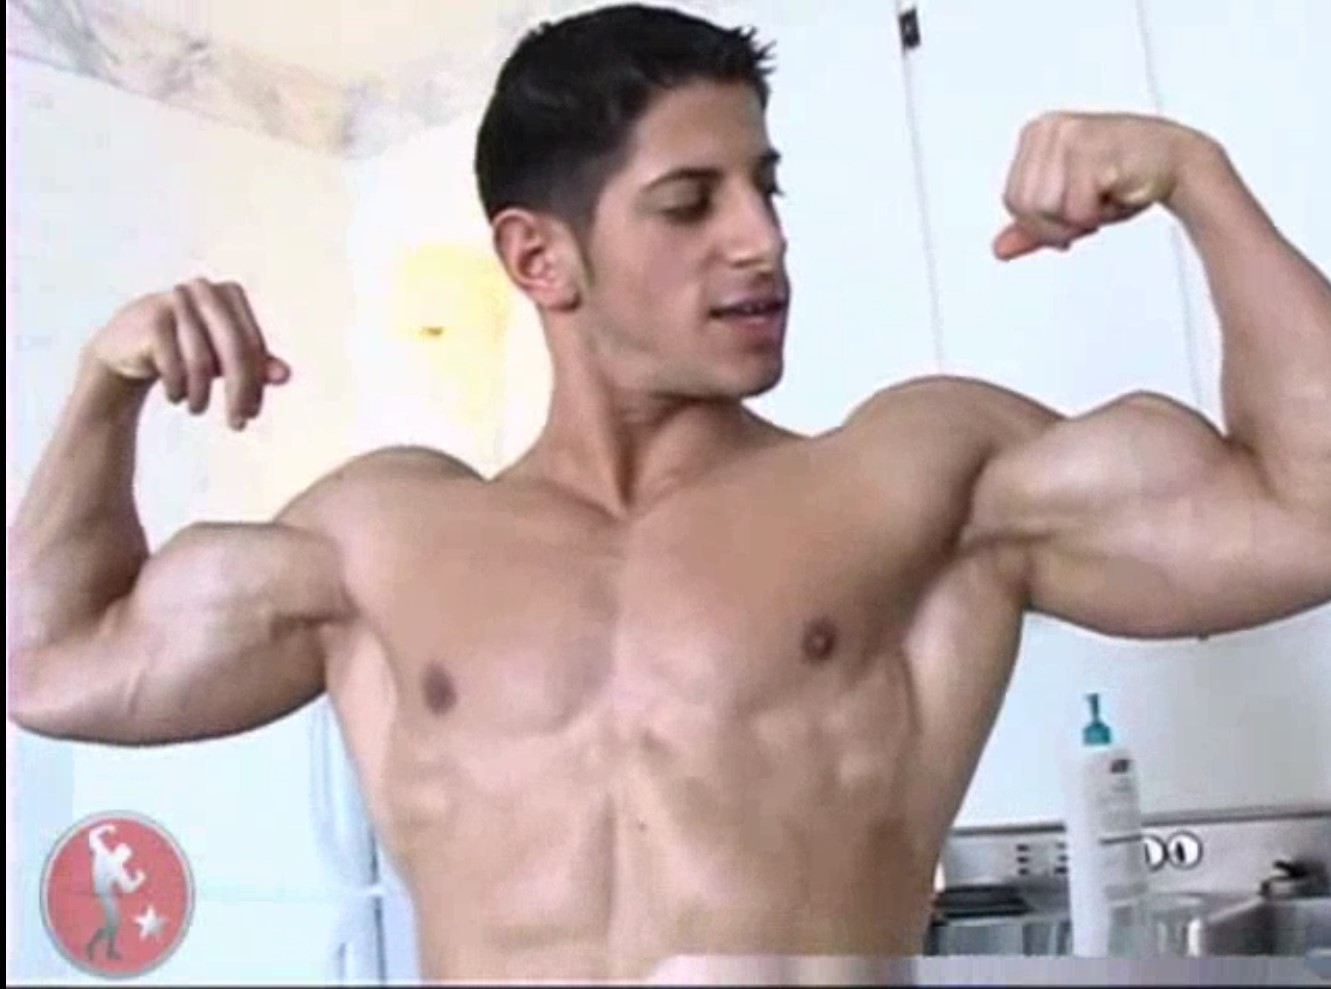 Dominic - Hot Muscle Dude and He Knows It